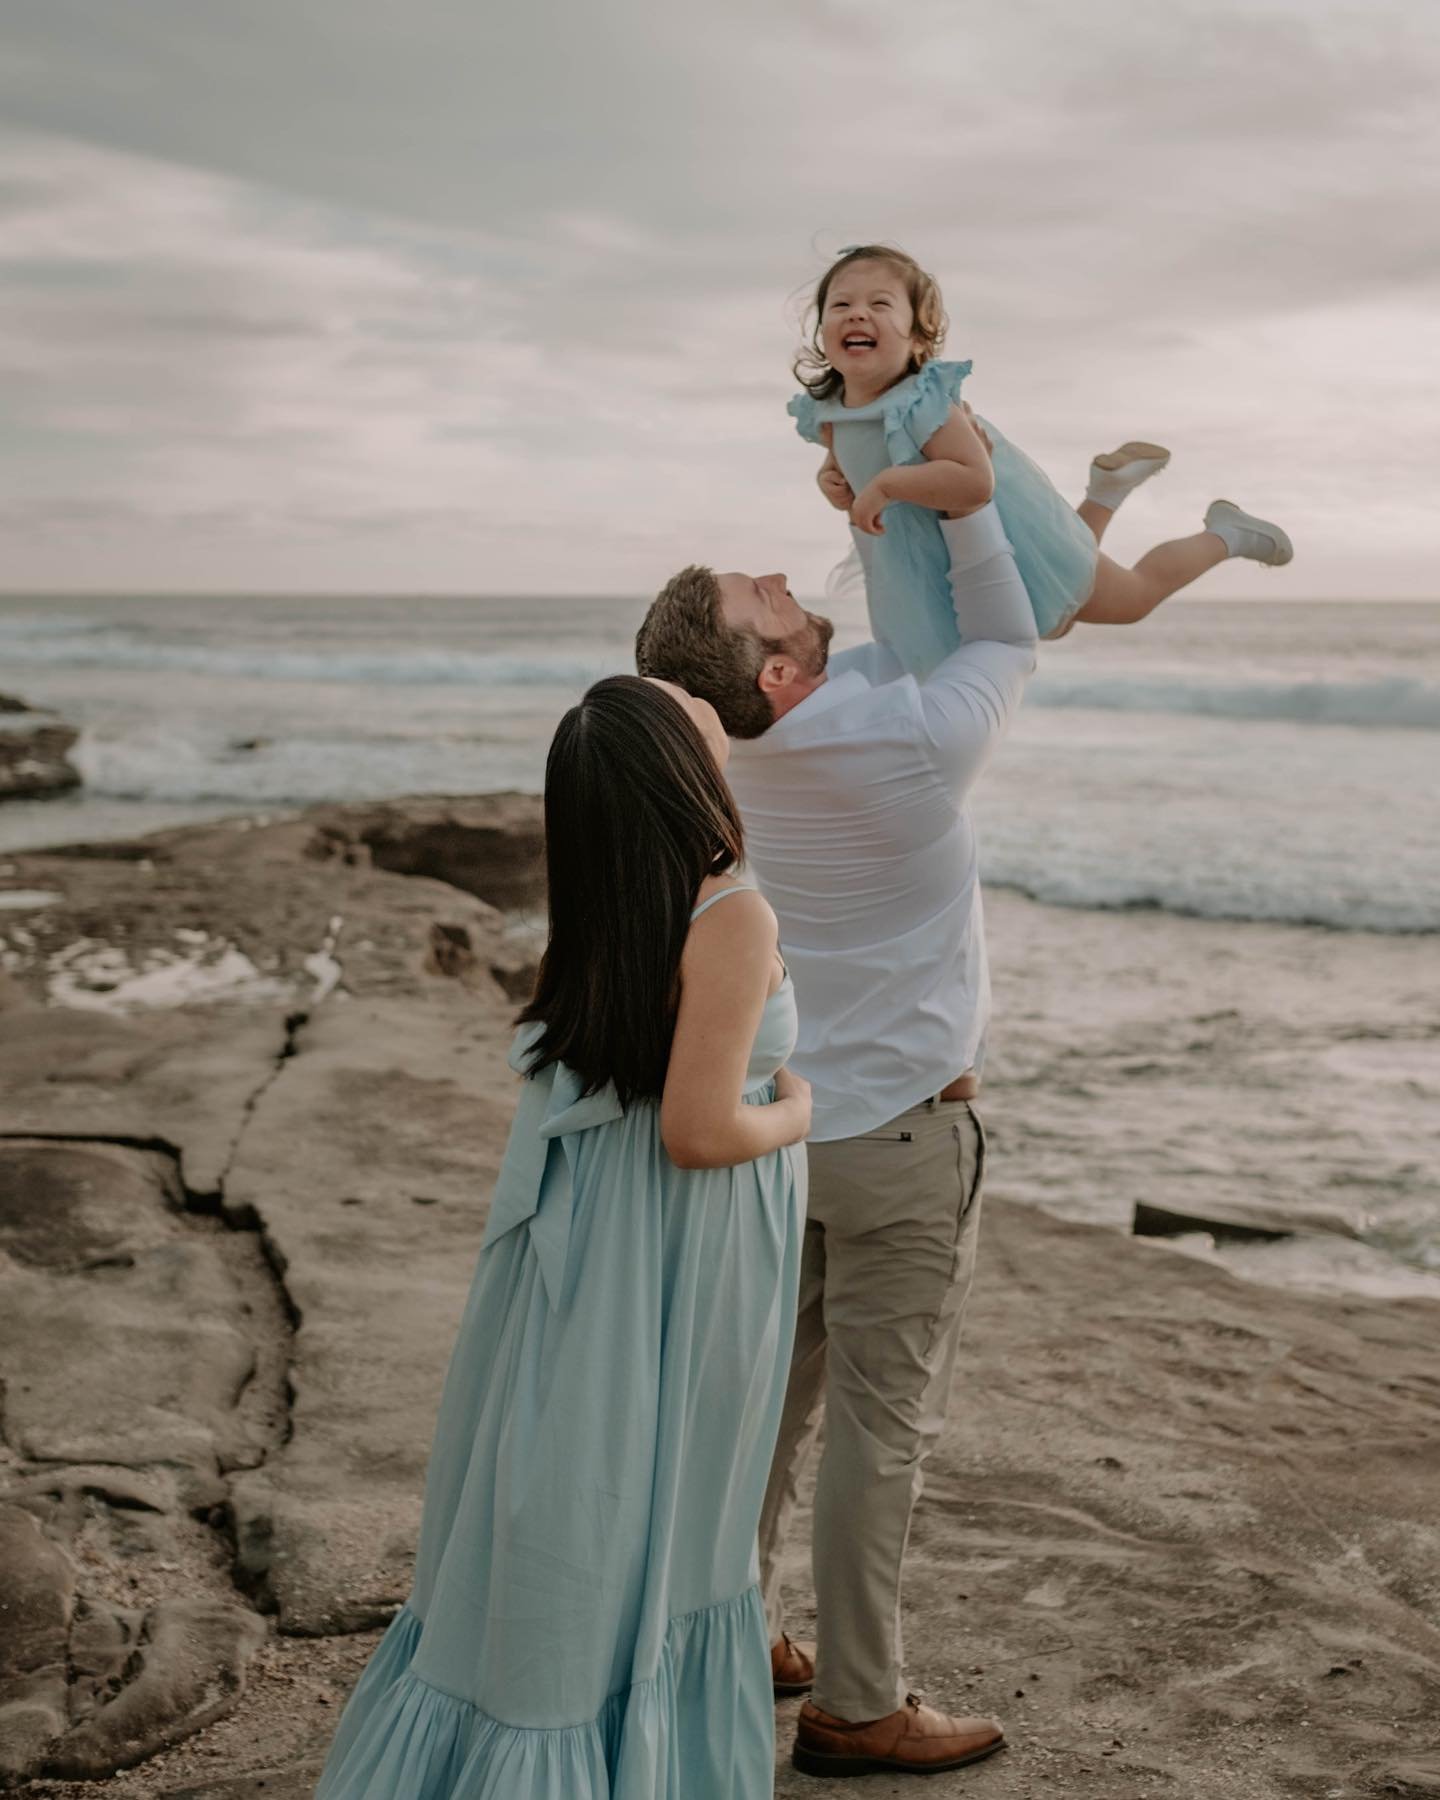 Maternity Magic with @michelle.filosa and her lovely family. To come back to San Diego three years after I left and get the chance to reconnect to with my community of clients and friends was very special. I absolutely love Milwaukee, but can&rsquo;t